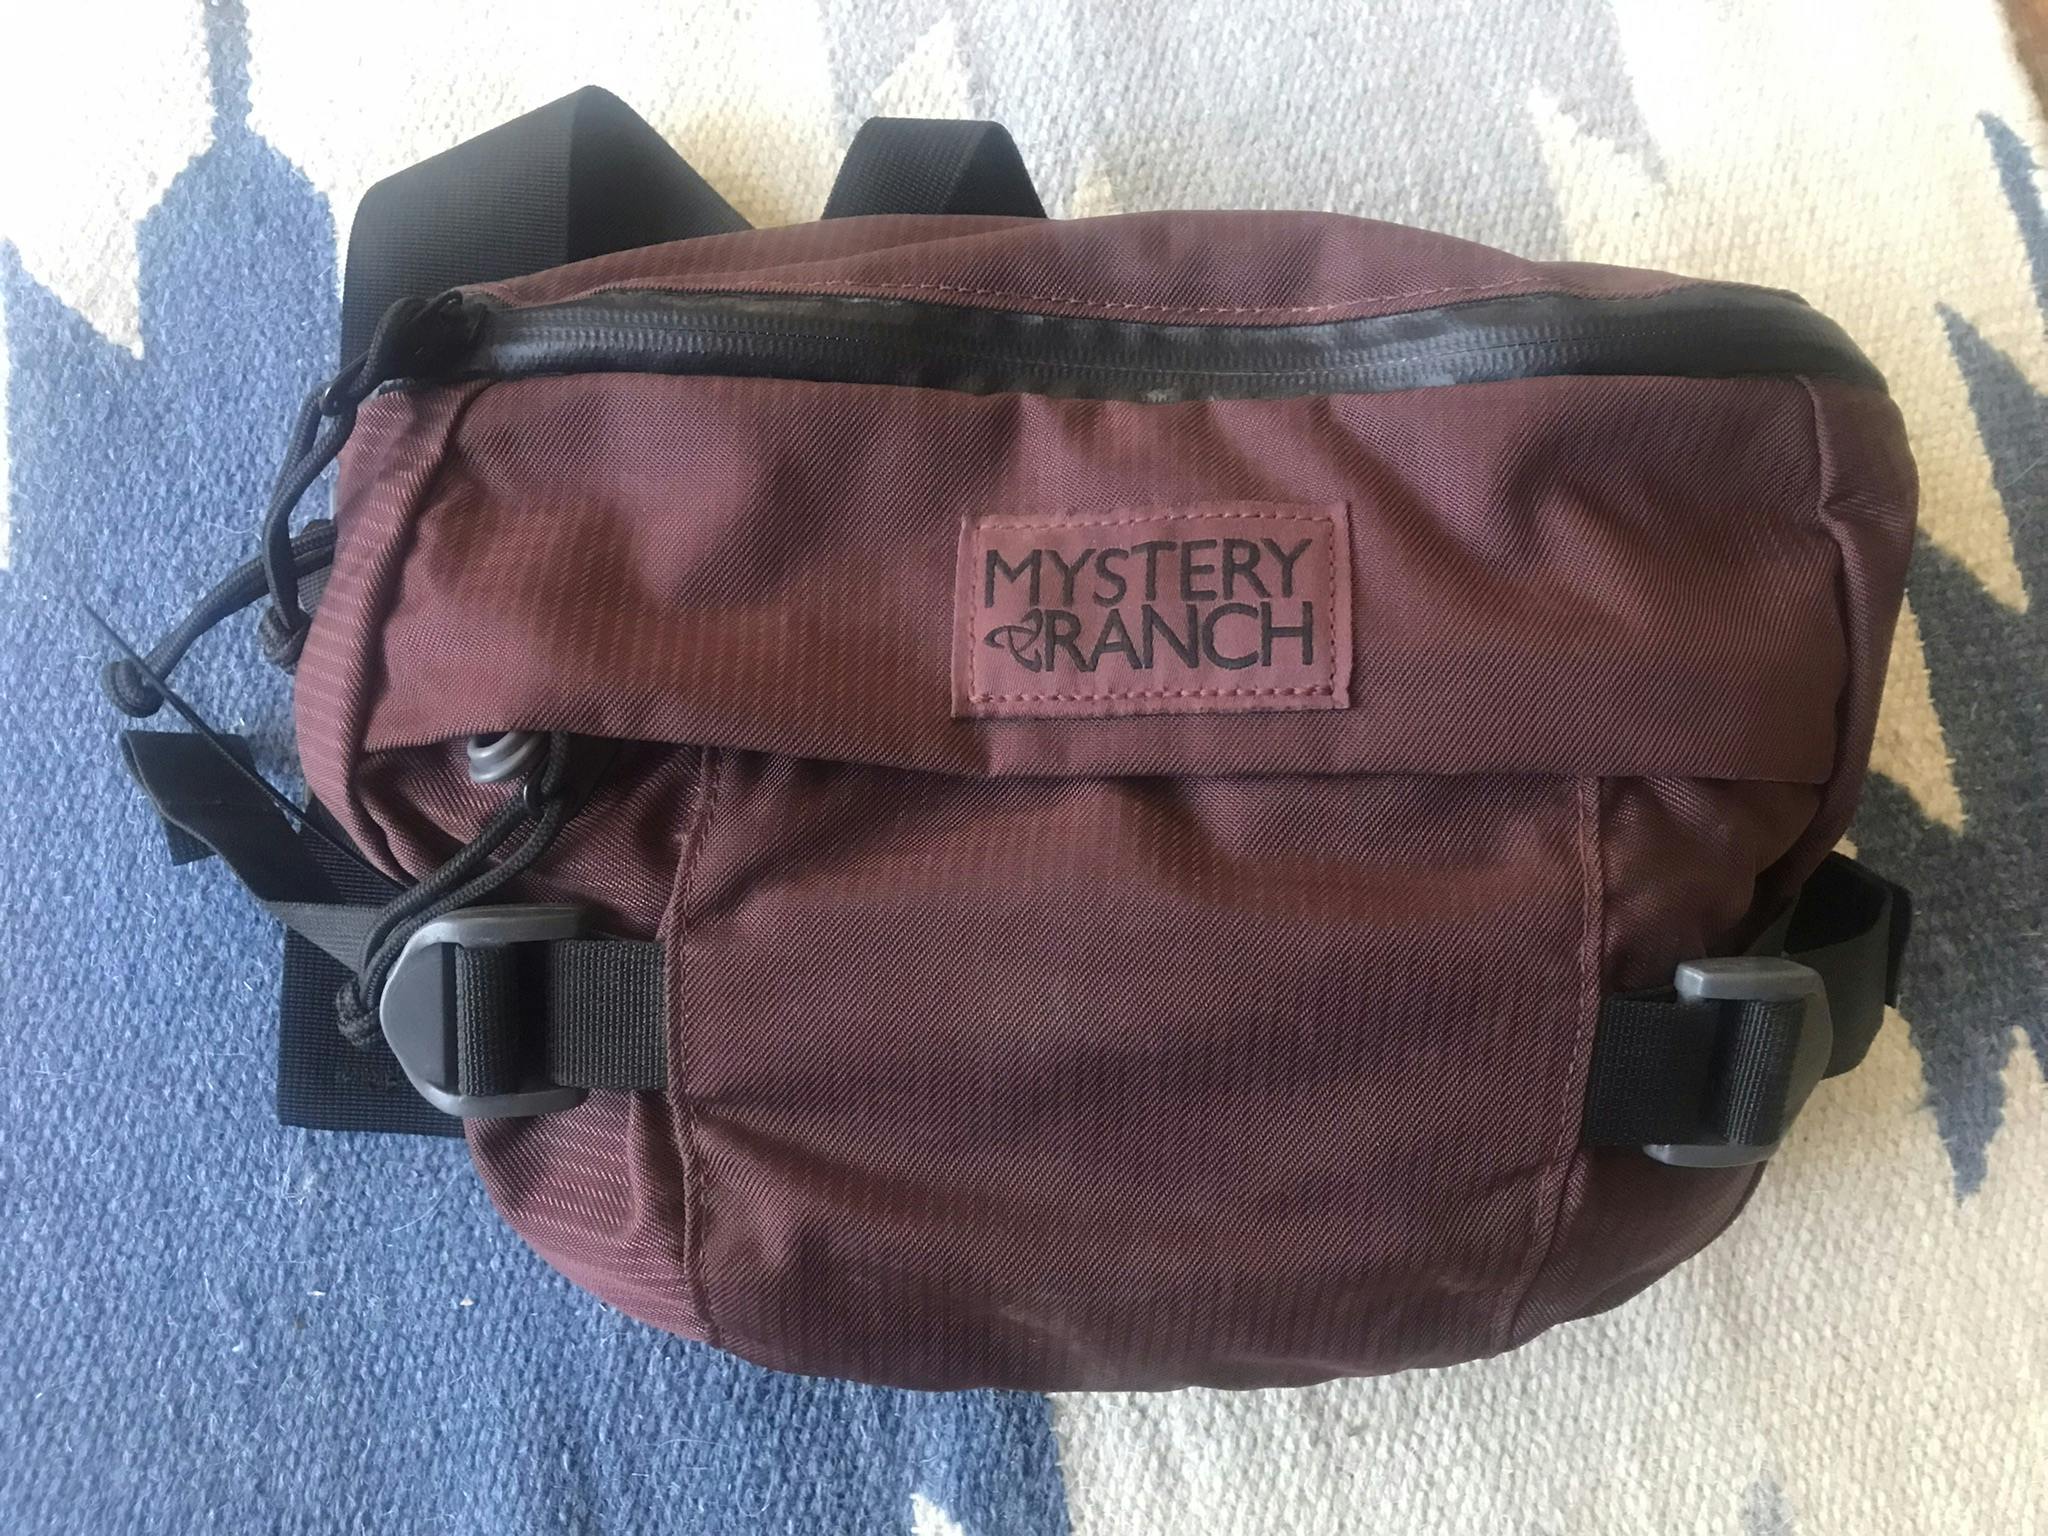 Mystery Ranch Hip Monkey vs Full Moon quick comparison : r/ManyBaggers